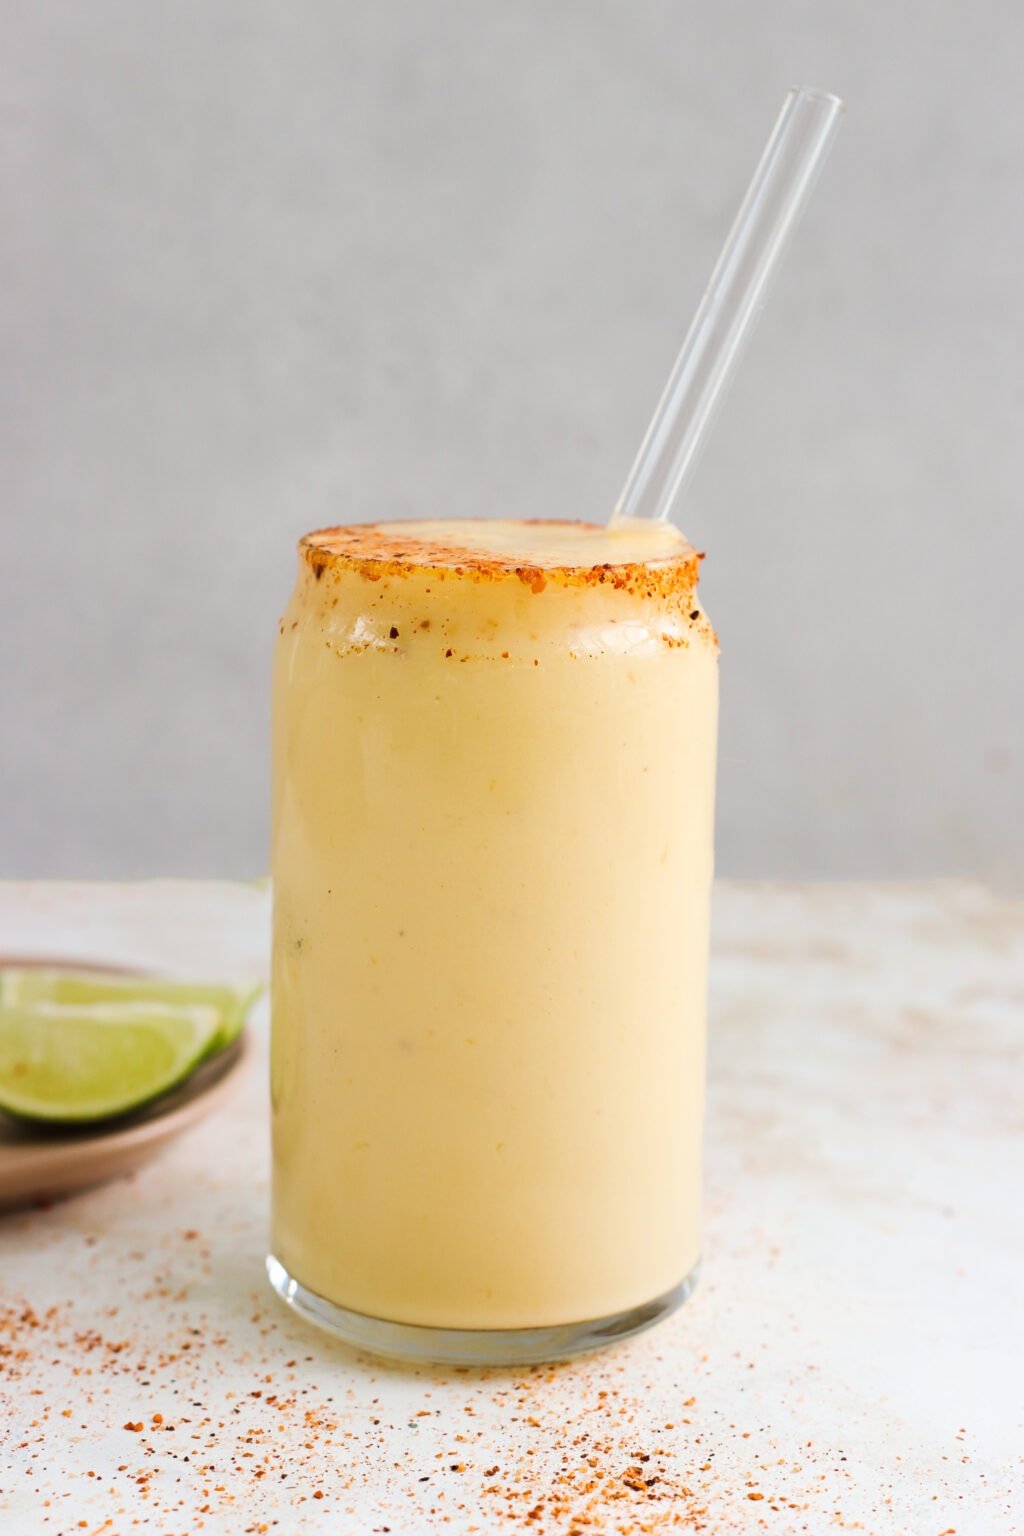 A tajin rimmed glass is filled with an orange colored mango and pineapple smoothie. There is a clear glass straw in the cup. On the counter there is a small plate with lime slices and a sprinkling of tajin spice. 